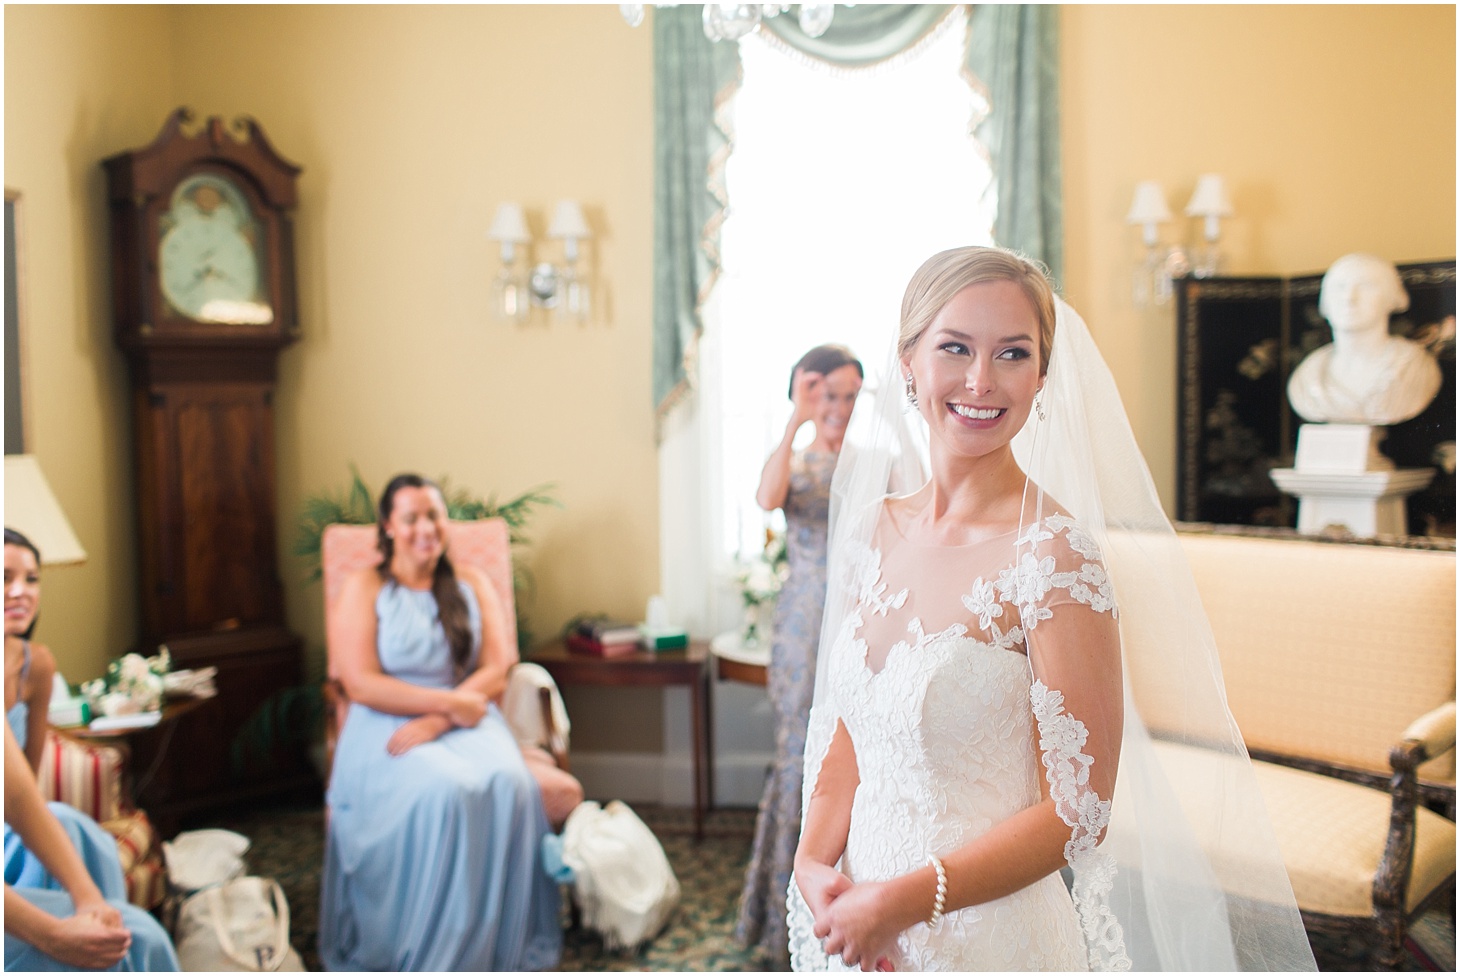 Bride Getting Ready before ceremony at Old Presbyterian Meeting House | Southern Black Tie wedding at St. Regis DC in Dusty Blue and Ivory | Sarah Bradshaw Photography